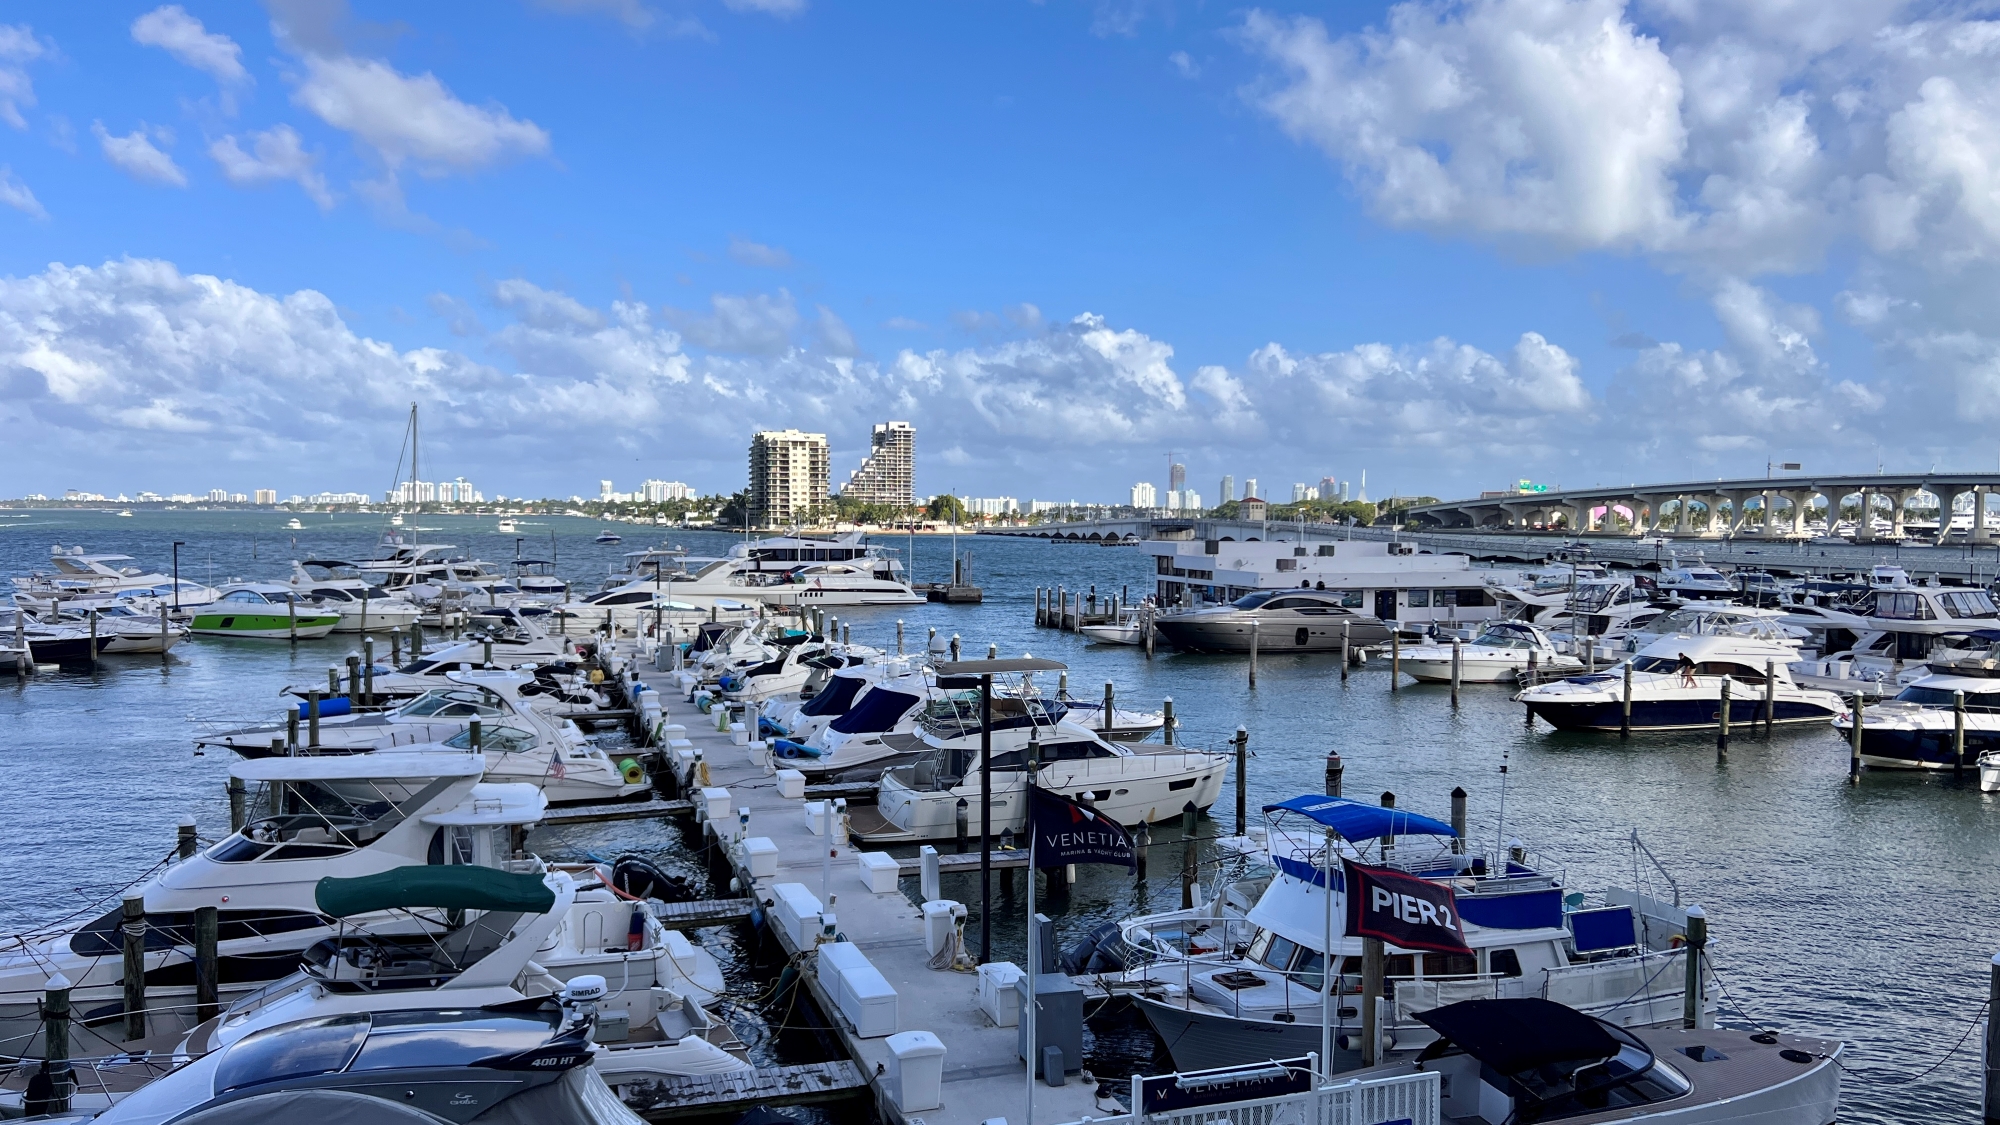 Miami Marriott Biscayne Bay View of the Marina